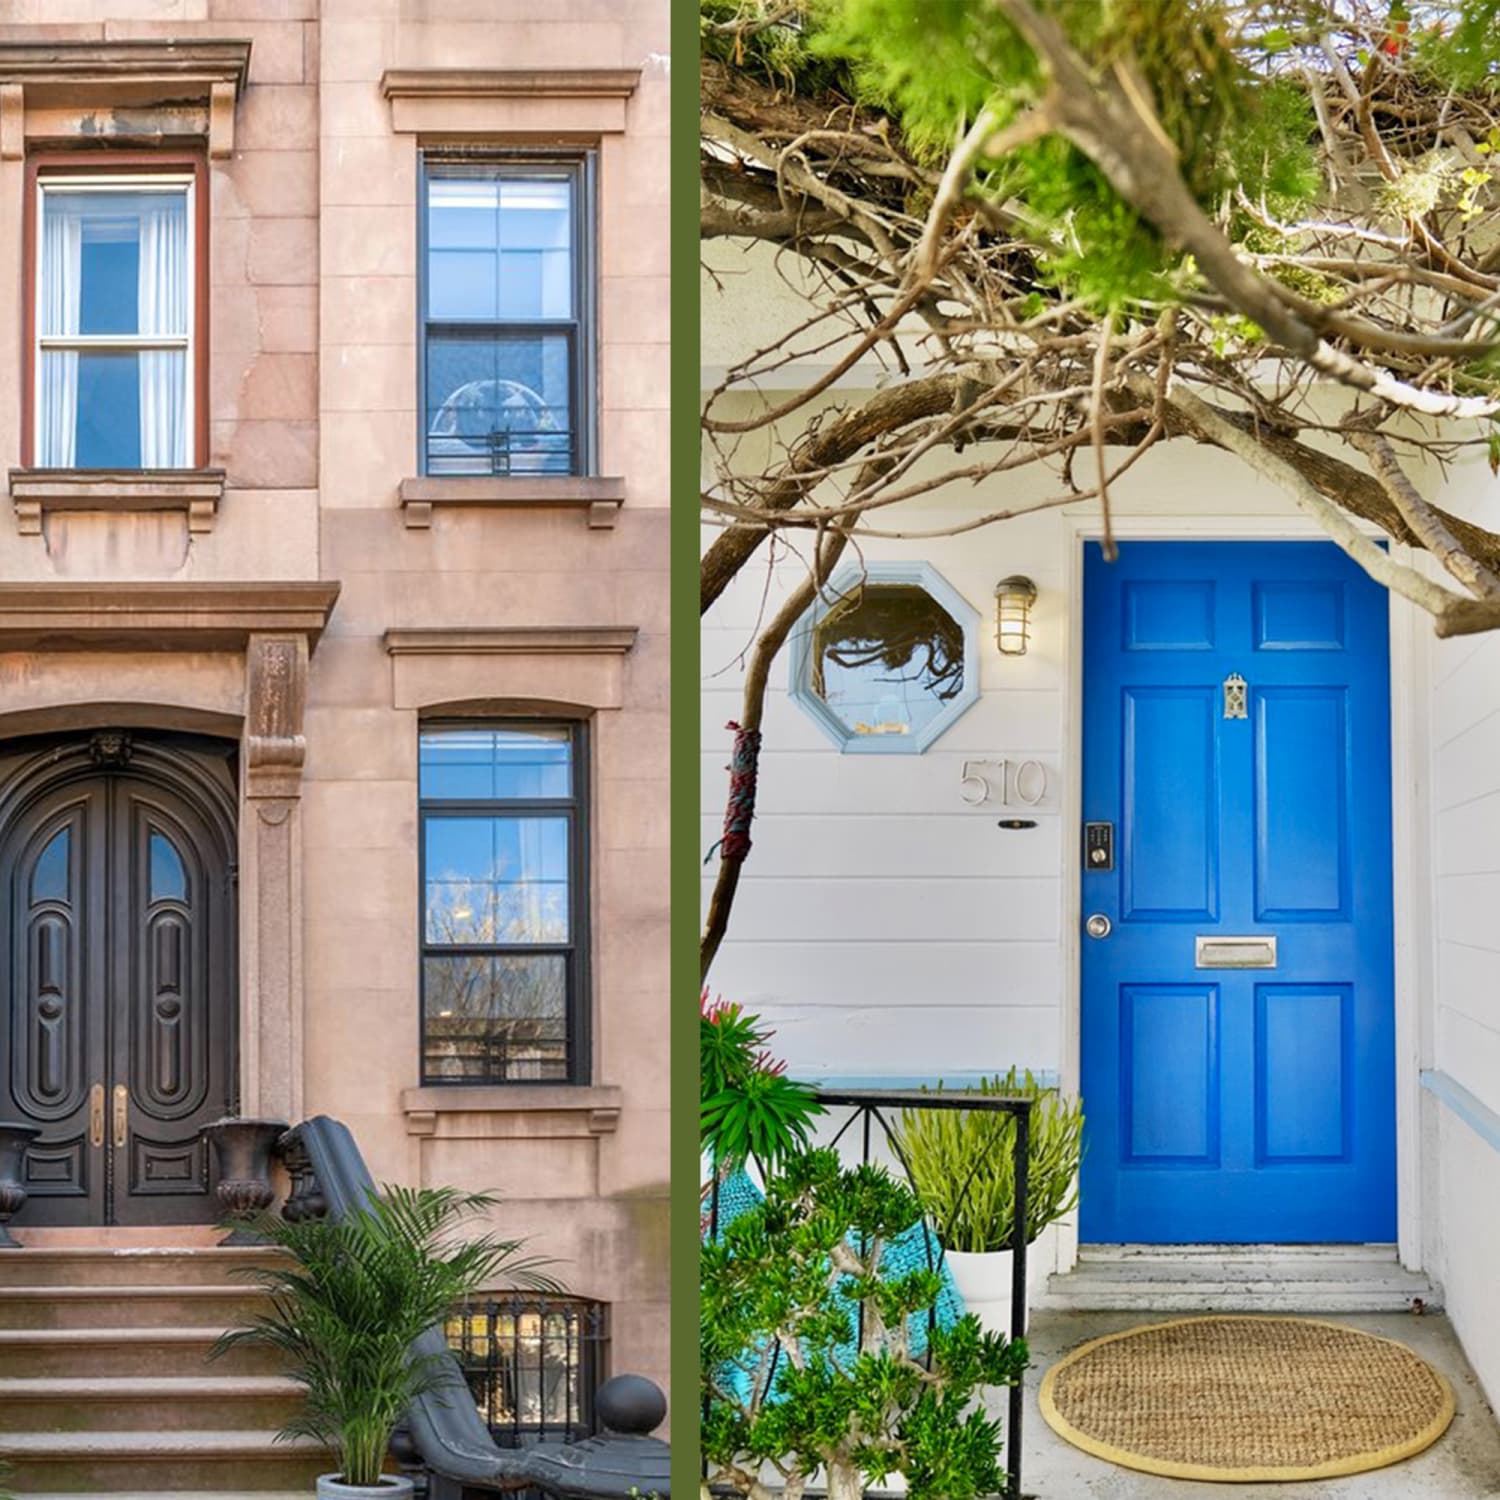 How 1,100 Square Feet Looks in a Brownstone vs. a Bungalow